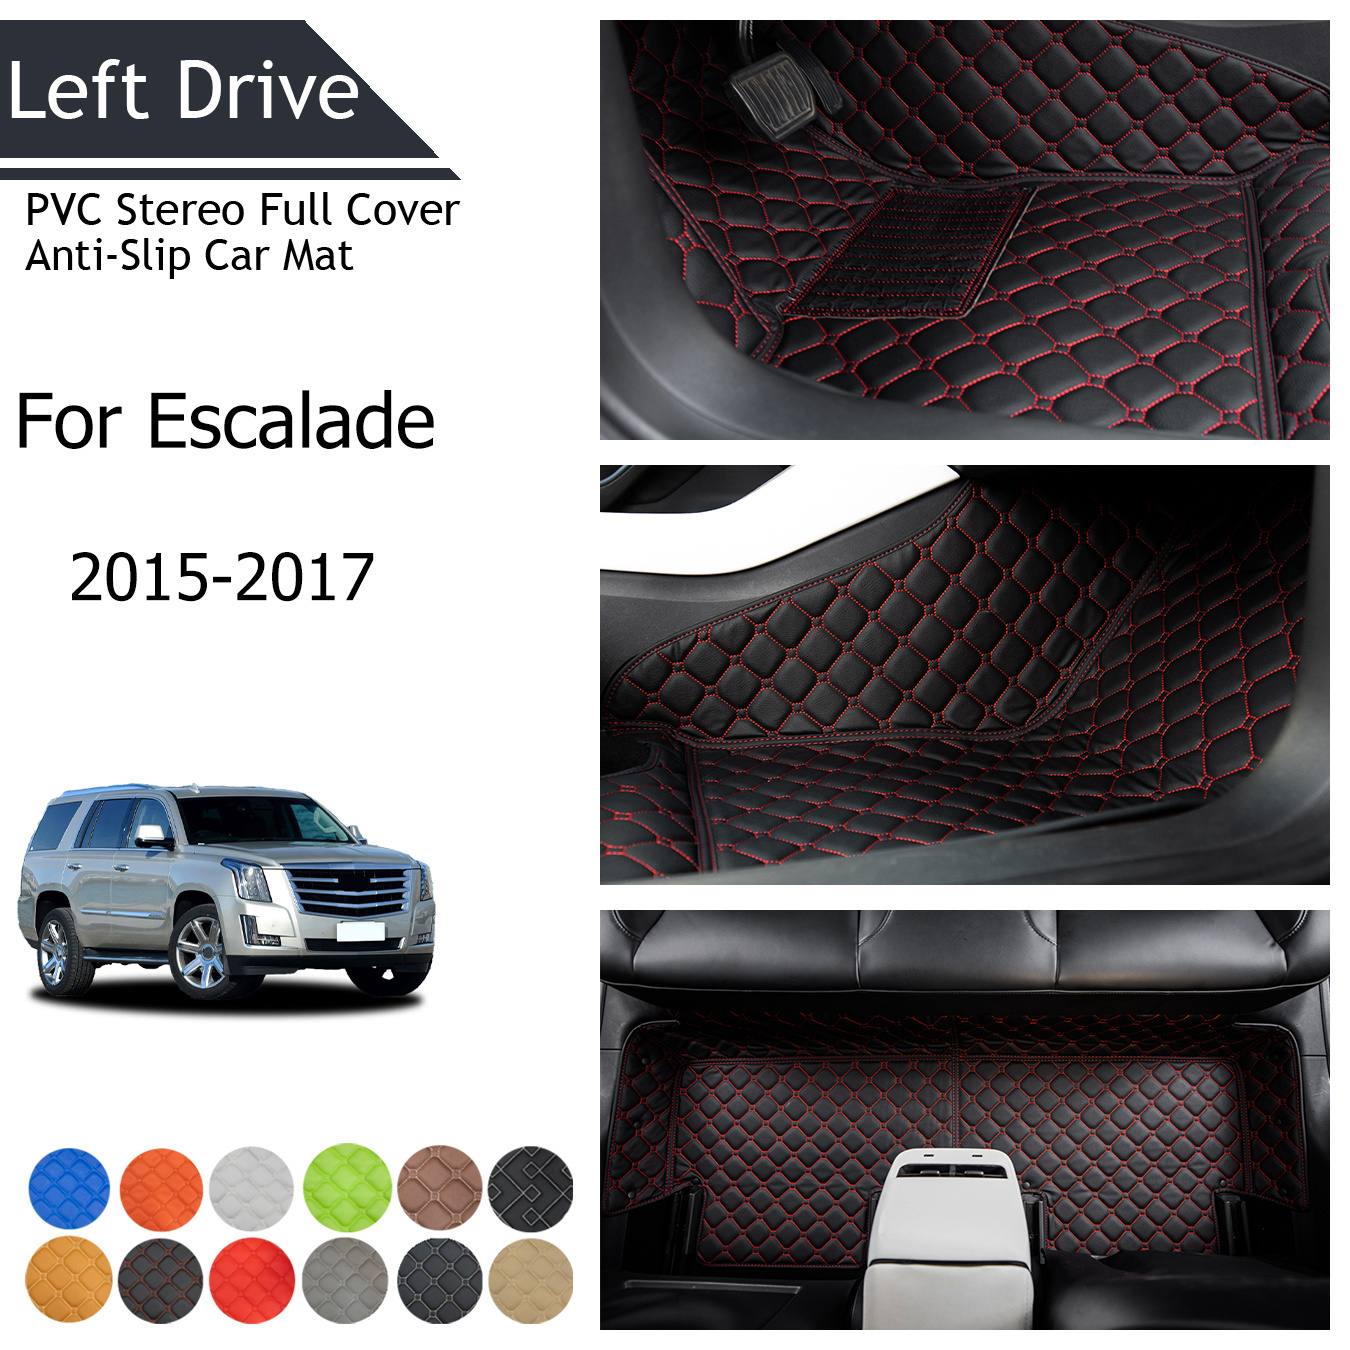 

Tegart [lhd]for Cadillac For Escalade (7seats)2015-2017 3 Layer Pvc Stereo Full Cover Anti-slip Car Mat